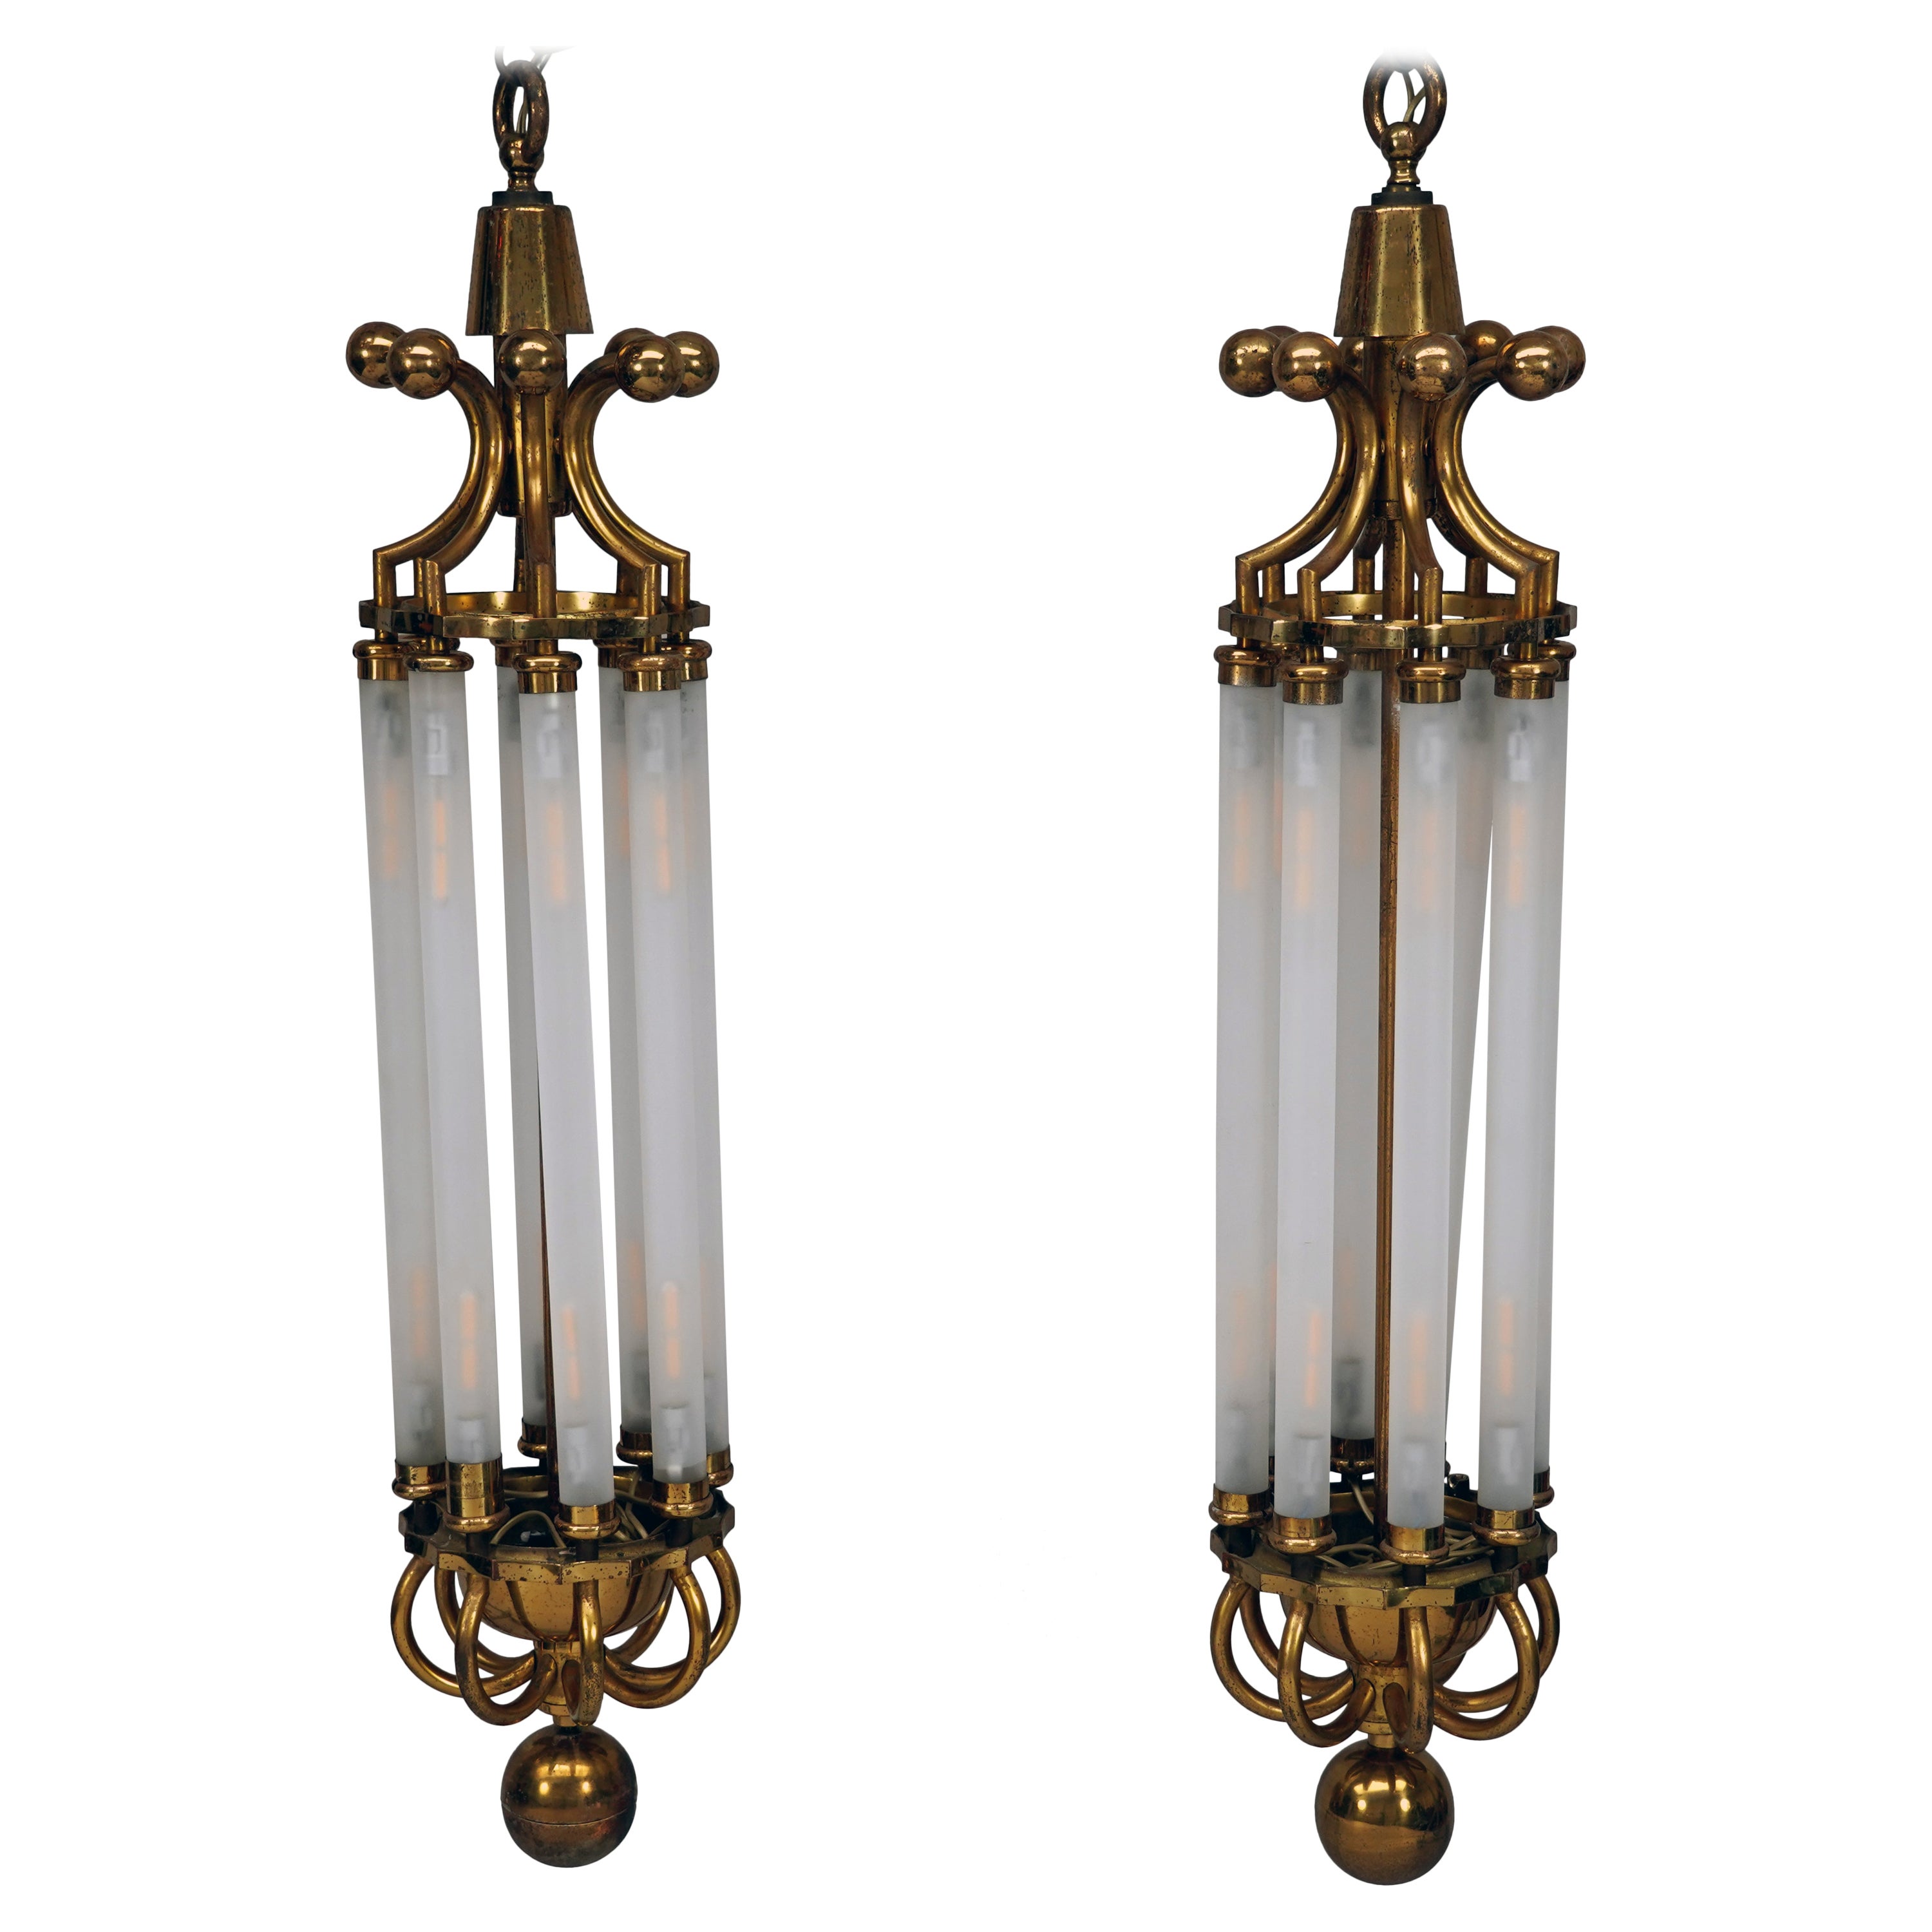 Pair of Rex Theater Brass Chandeliers, France, circa 1950